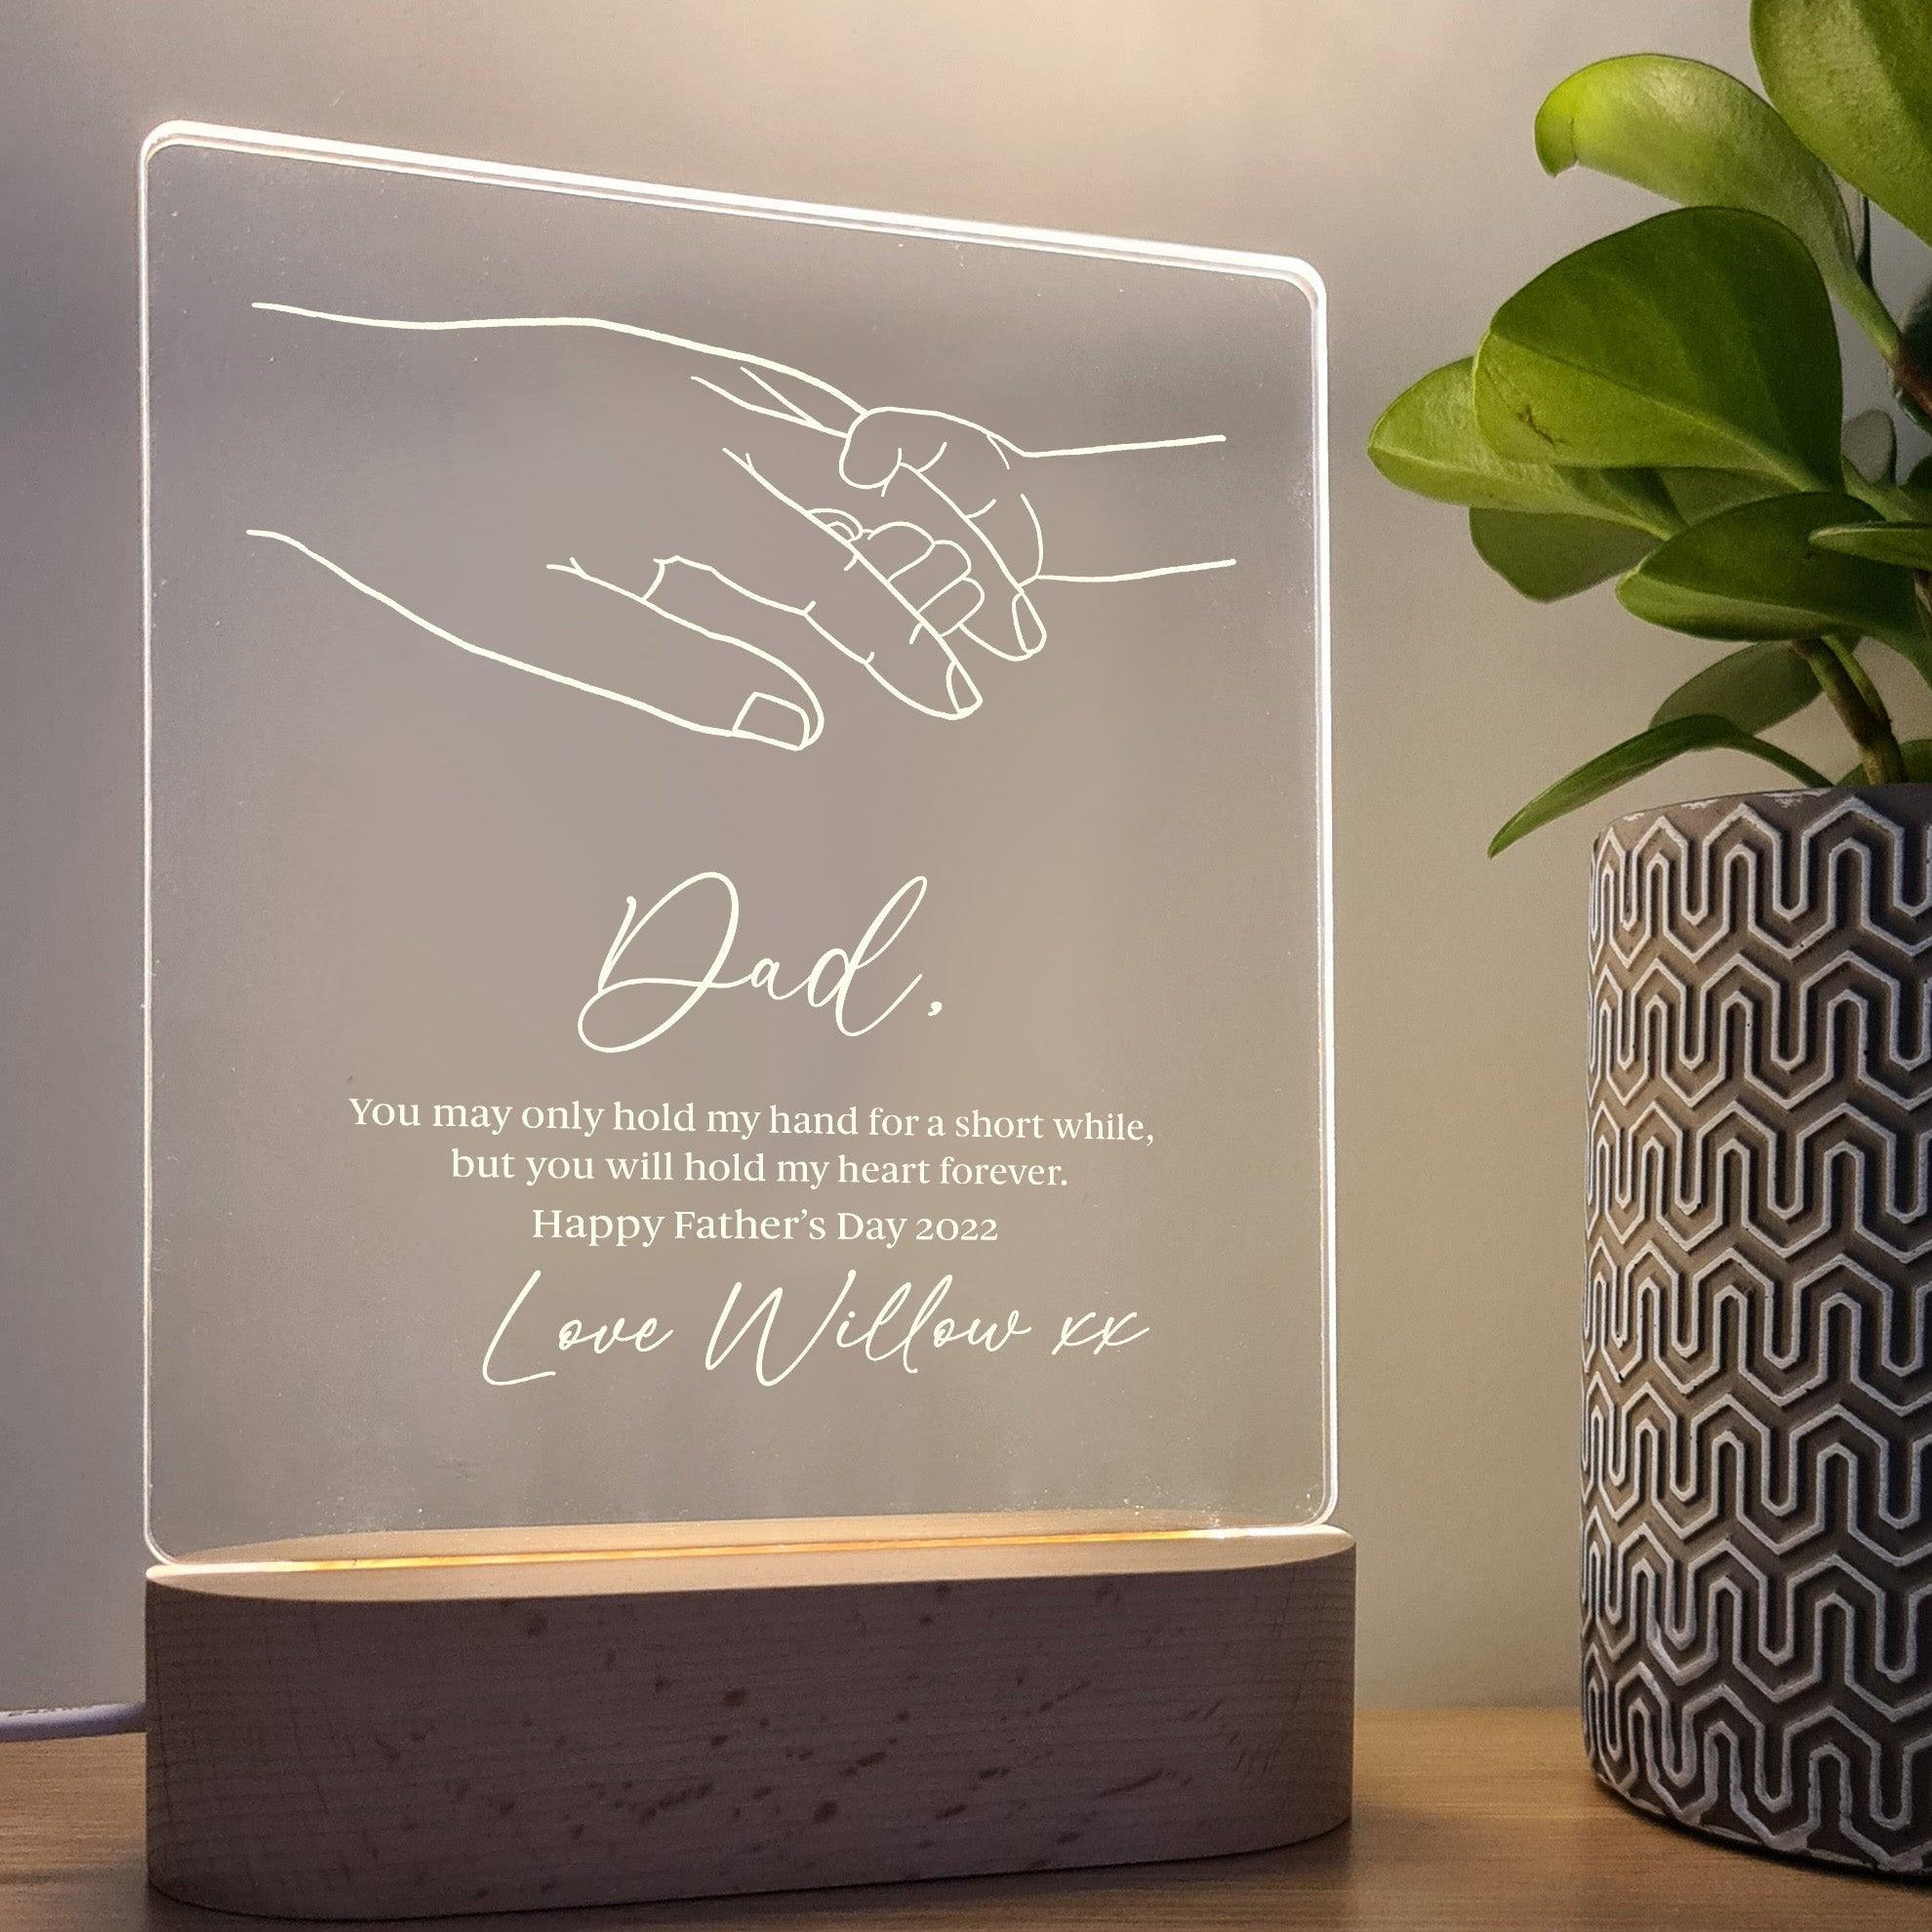 Hold My Hand Daddy - Personalised Father's Day Night Light - The Willow Corner